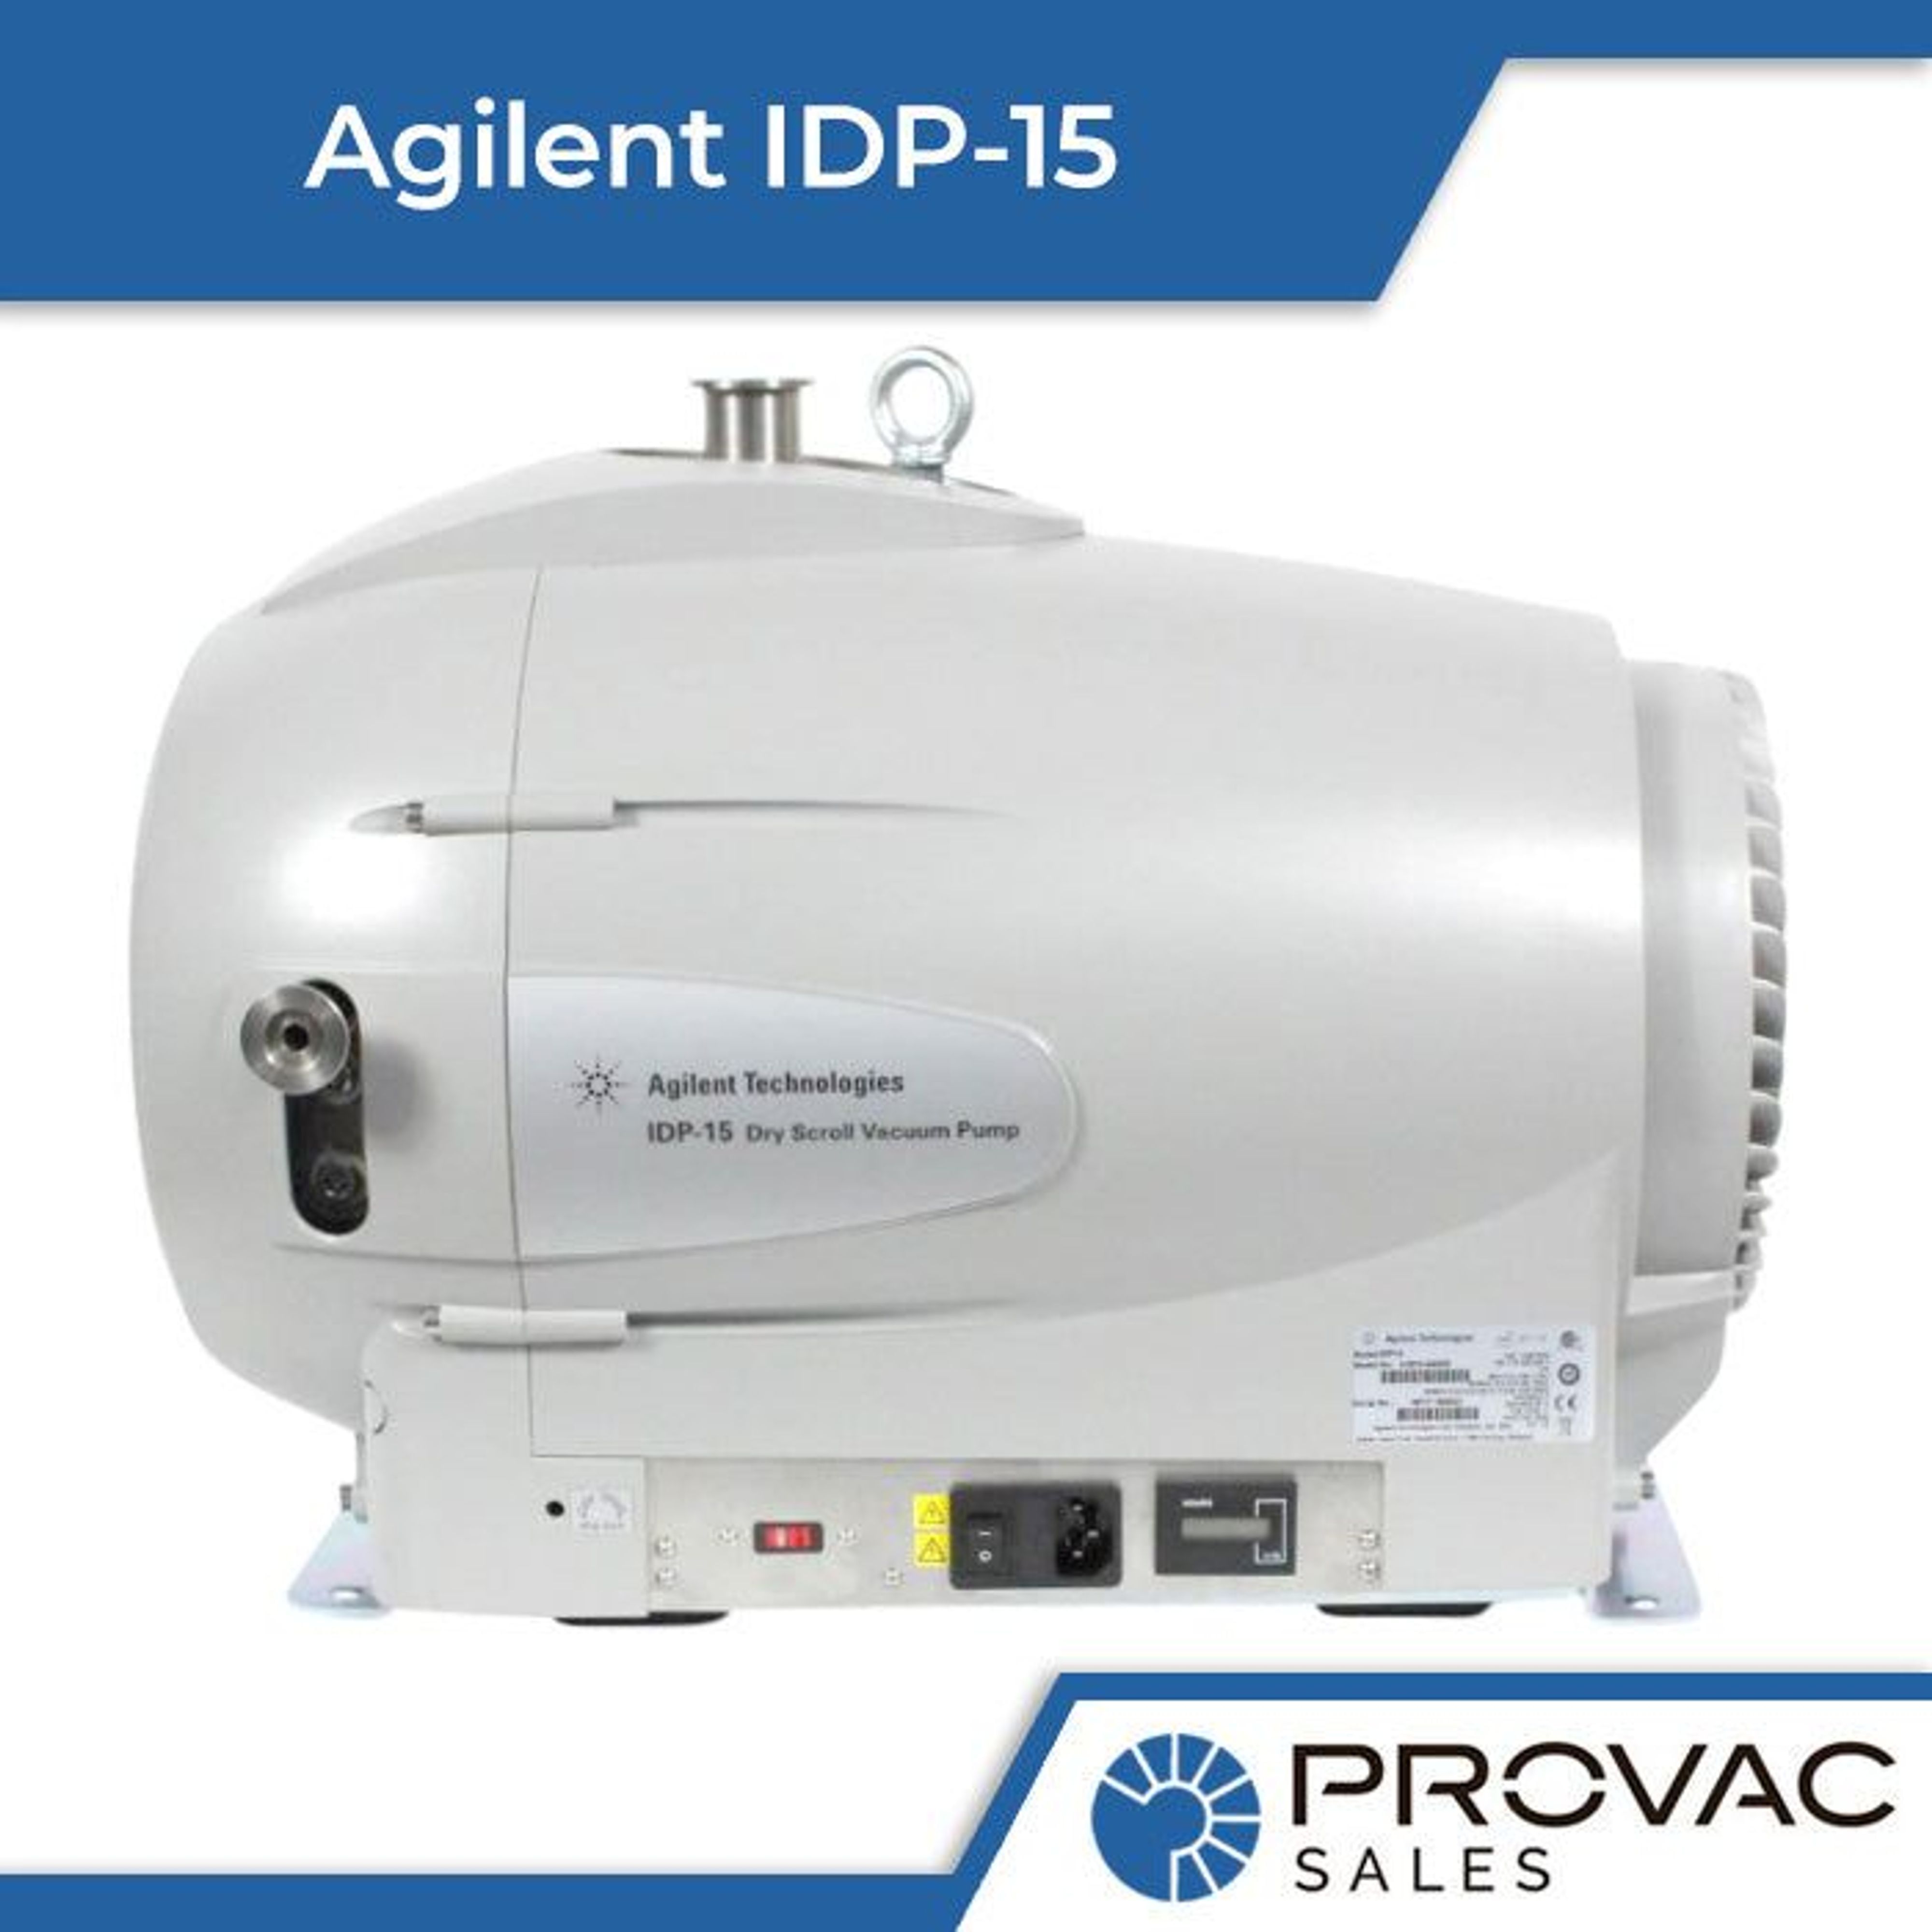 Agilent IDP-15: New, Ready to Ship, In Stock Background